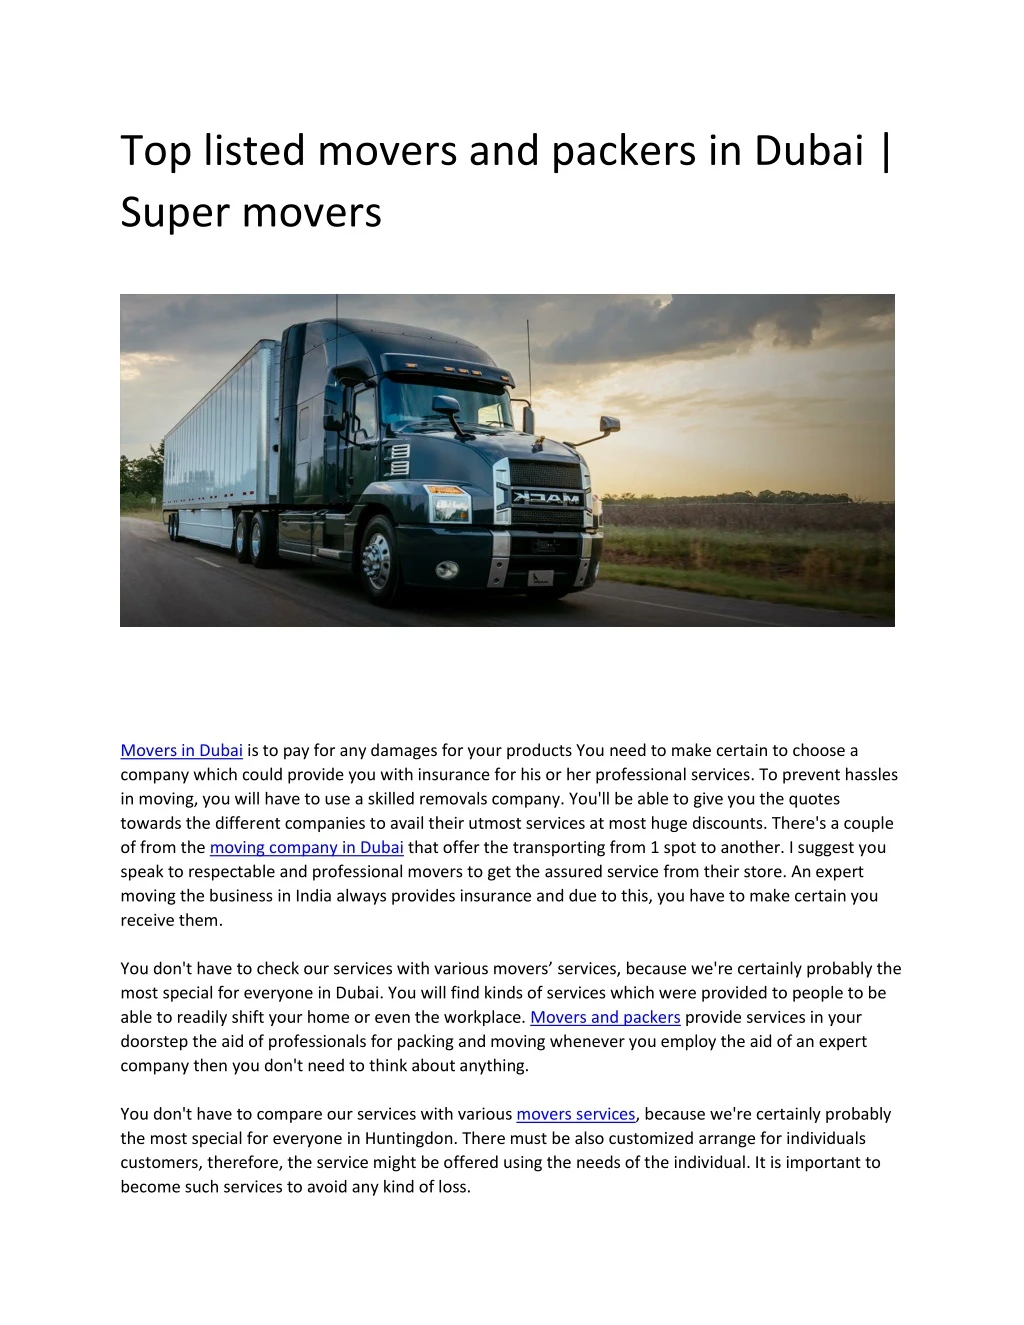 top listed movers and packers in dubai super